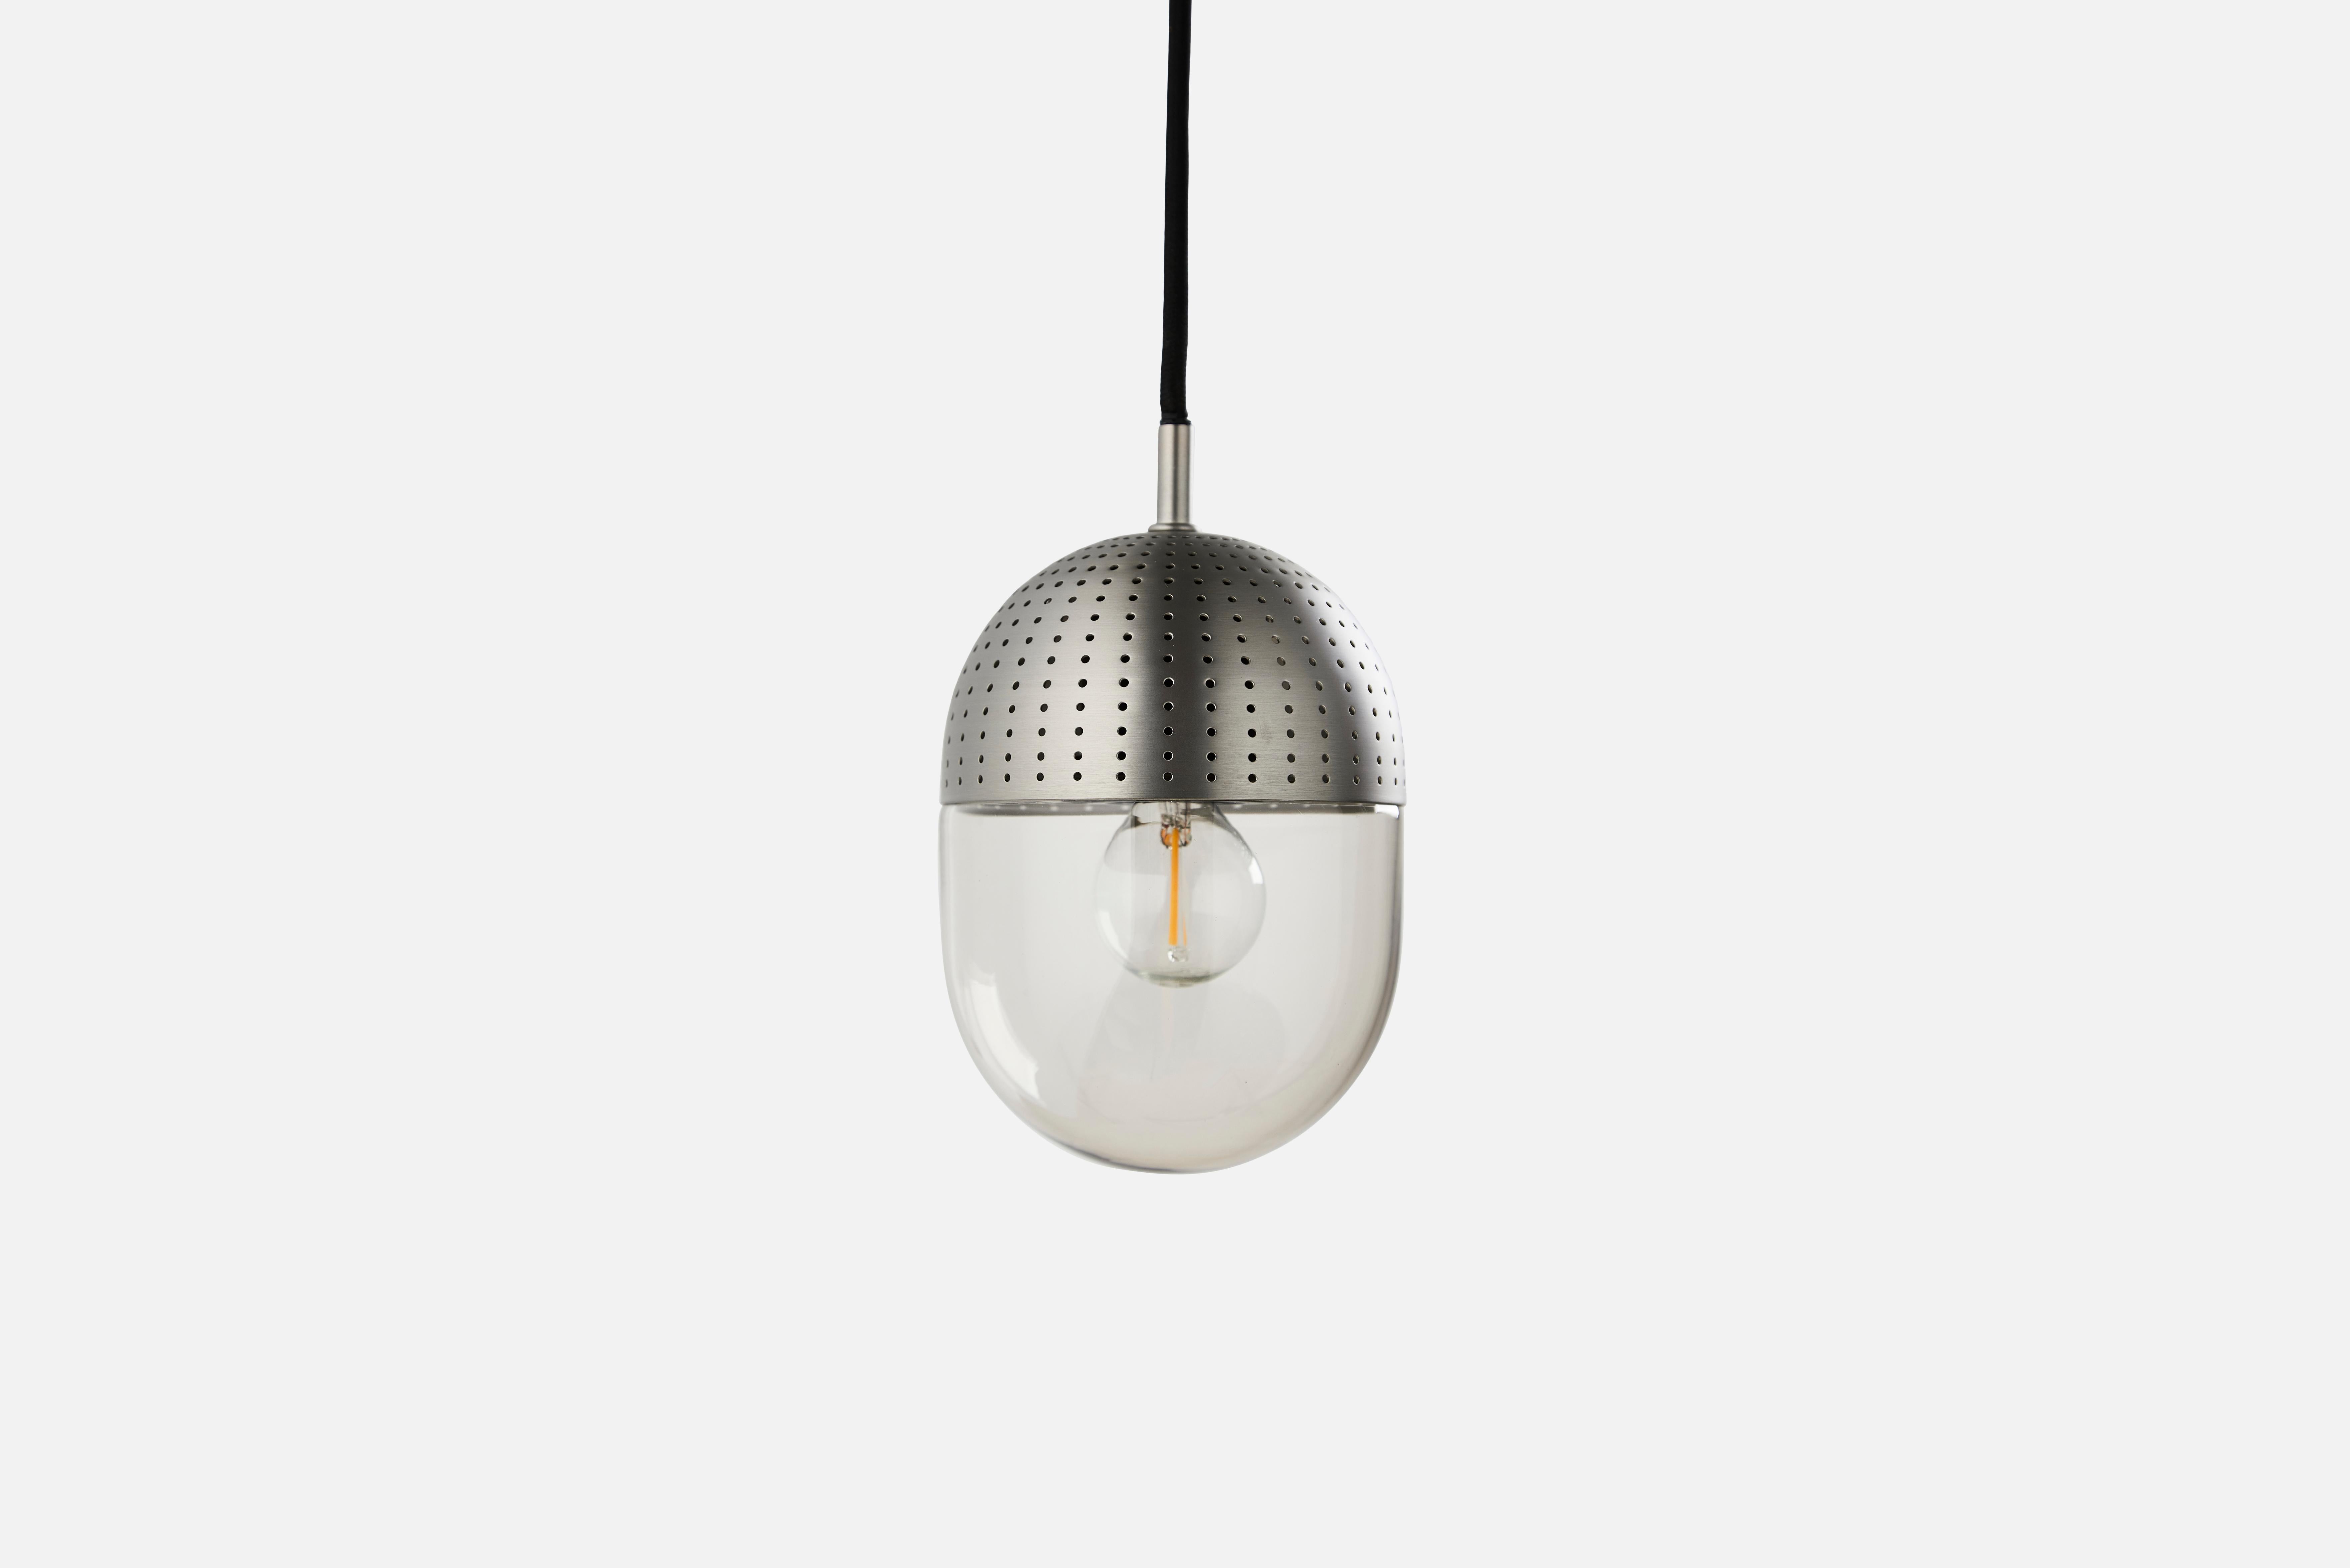 Medium Satin dot pendant lamp by Rikke Frost
Materials: Metal, glass.
Dimensions: D 14 x H 16.6 cm
Available in black or satin and in 3 sizes: H 13, H 16.6, H 21 cm.

Rikke Frost is a Danish graduate from the School of Architecture Aarhus.